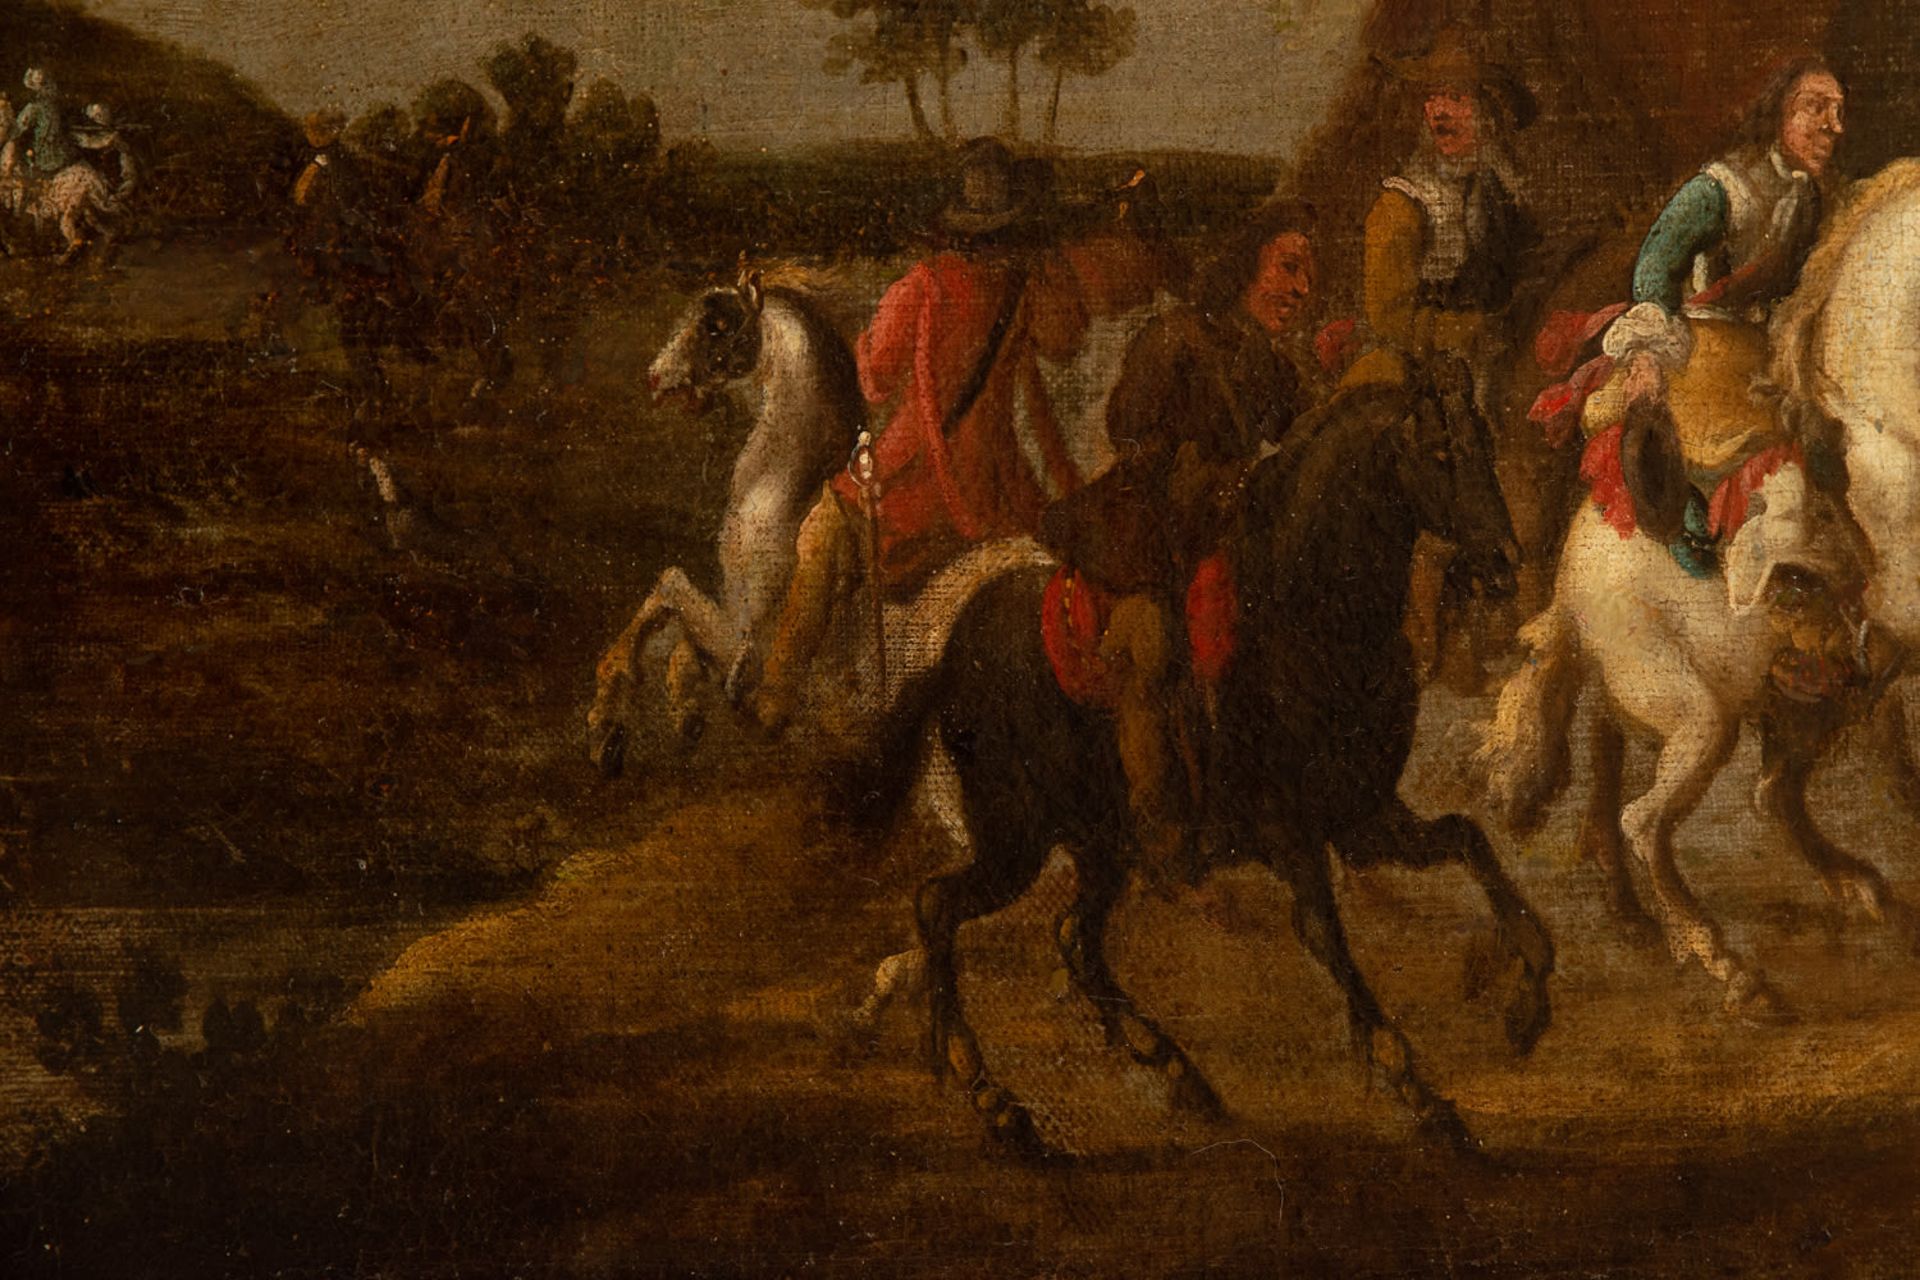 Cavalry scene, Dutch school from the second half of the 17th century - Image 9 of 12